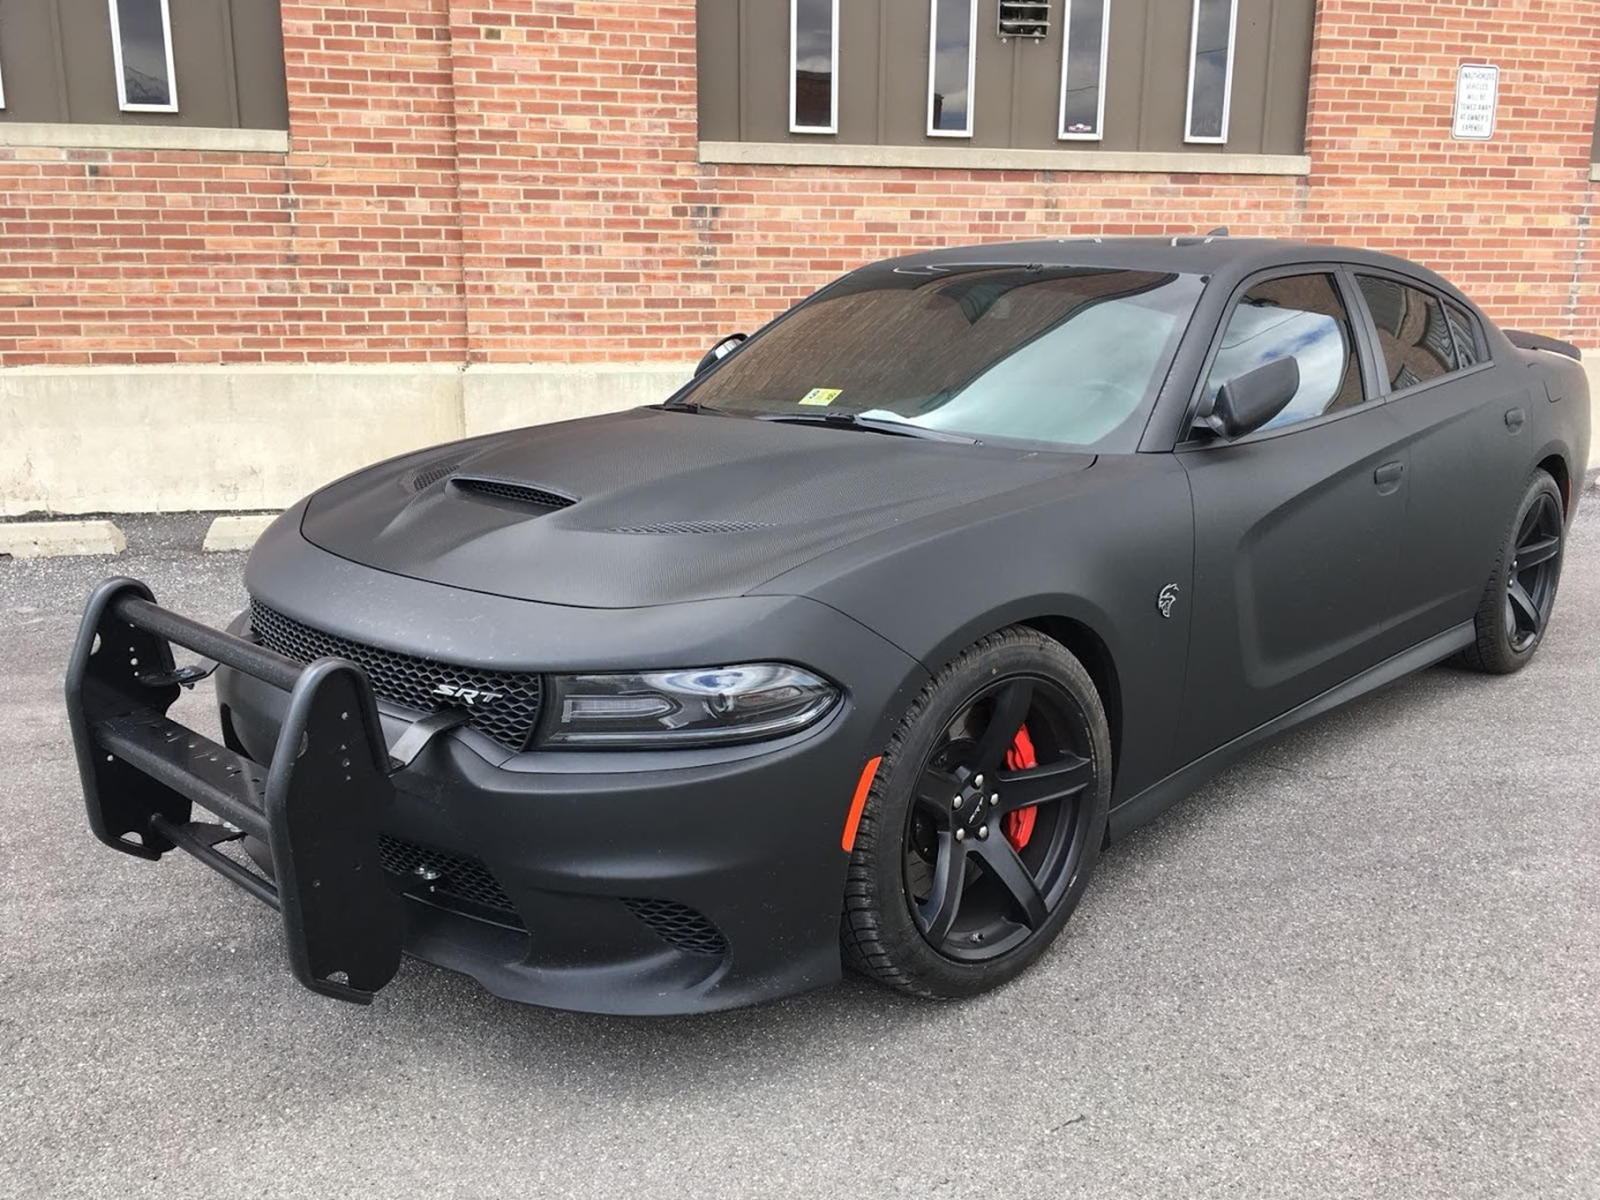 Good Luck Outrunning The Cops In This New Armored Dodge Charger Hellcat |  CarBuzz